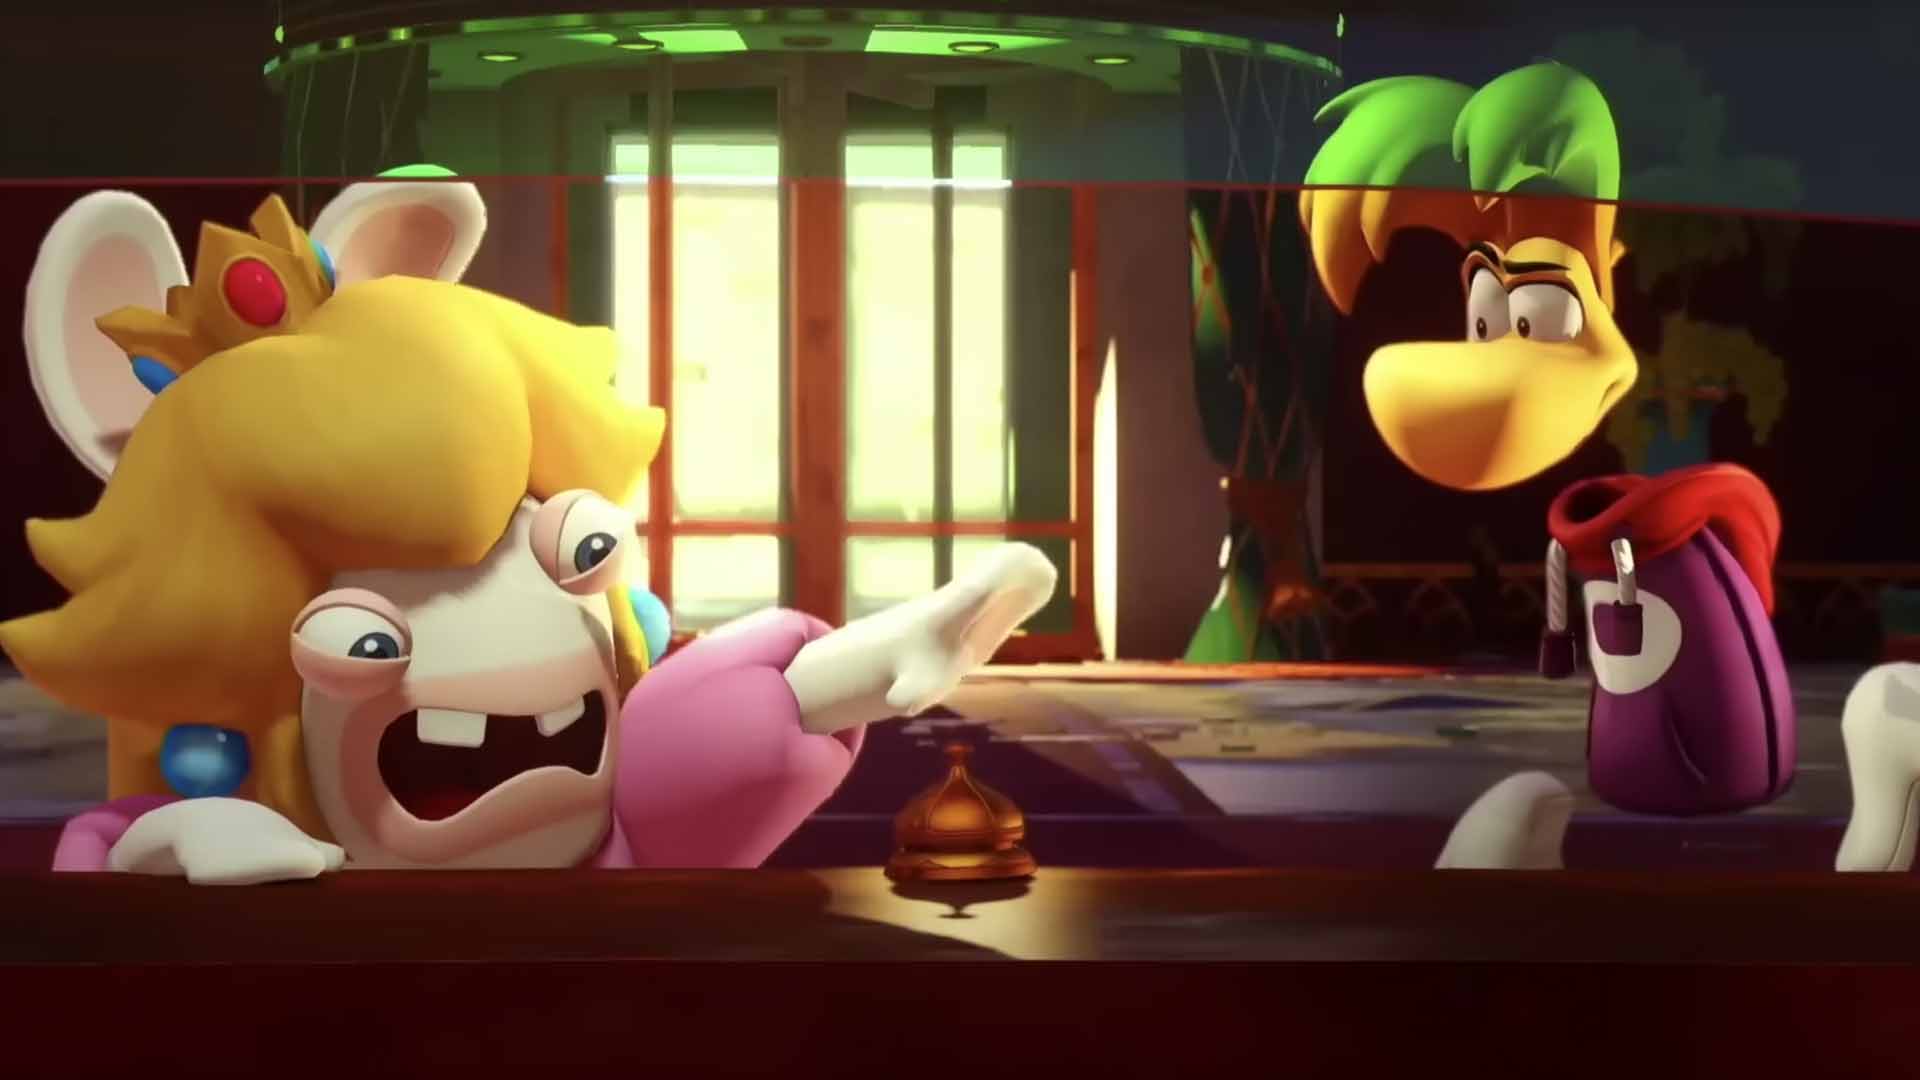 Rayman Is Back In 'Mario + Rabbids Sparks Of Hope' - So Is He Actually Cool  Now?